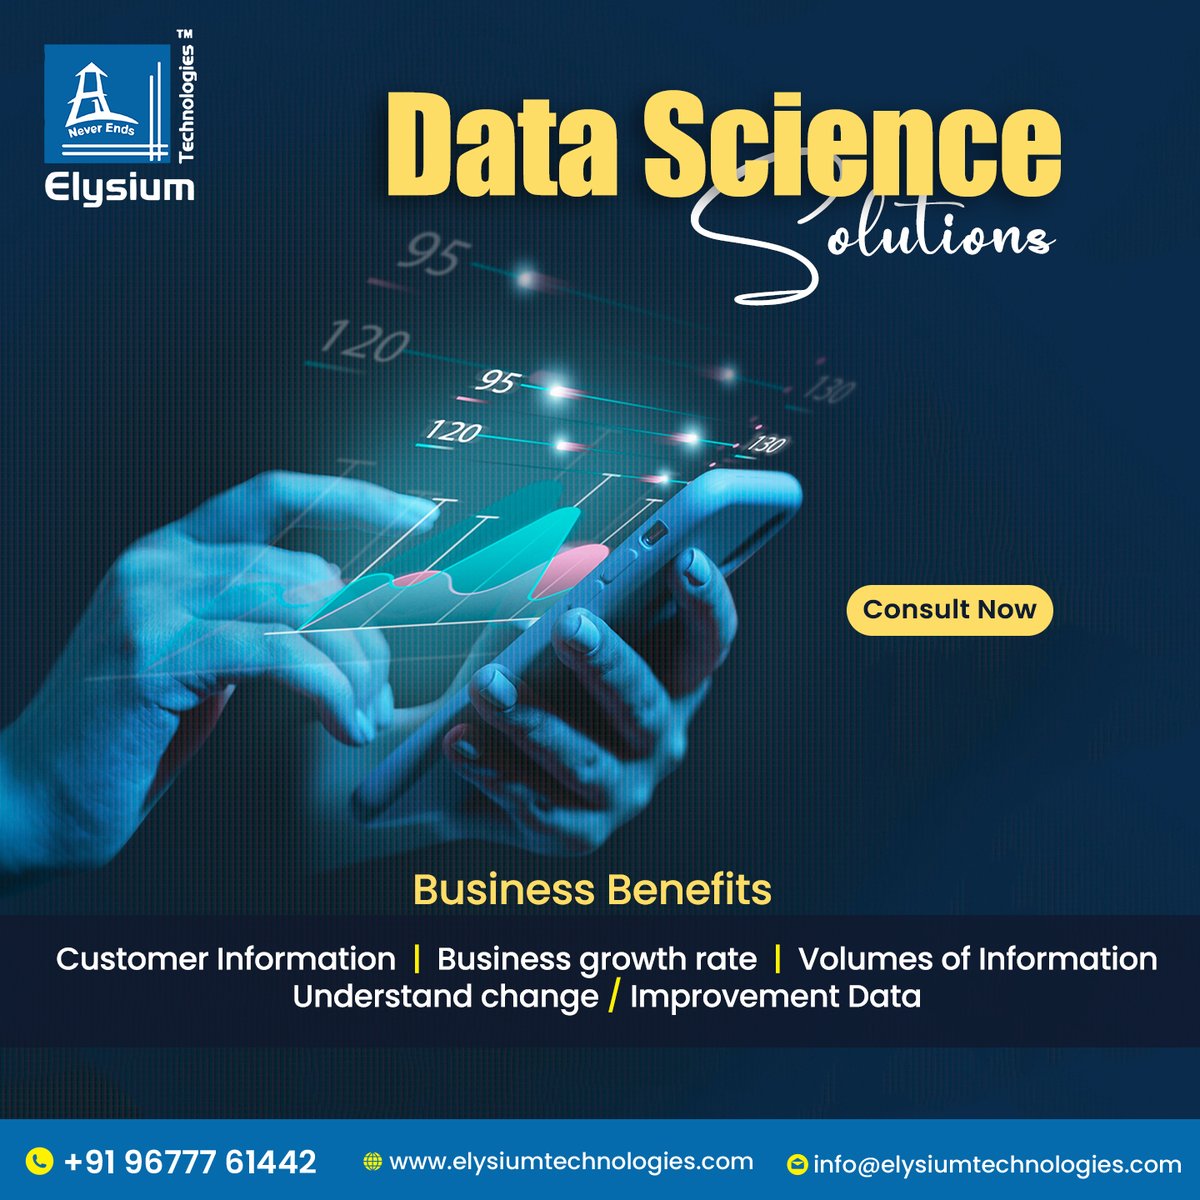 Data science Service for your business growth

#elysiumtechnologies #ETPL #datascienceconsultation #ConsultingServices #datascienceagency #datainsights #datasciencecompany #datainsights
#artificialintelligencetechnology #WorldTelecommunicationDay